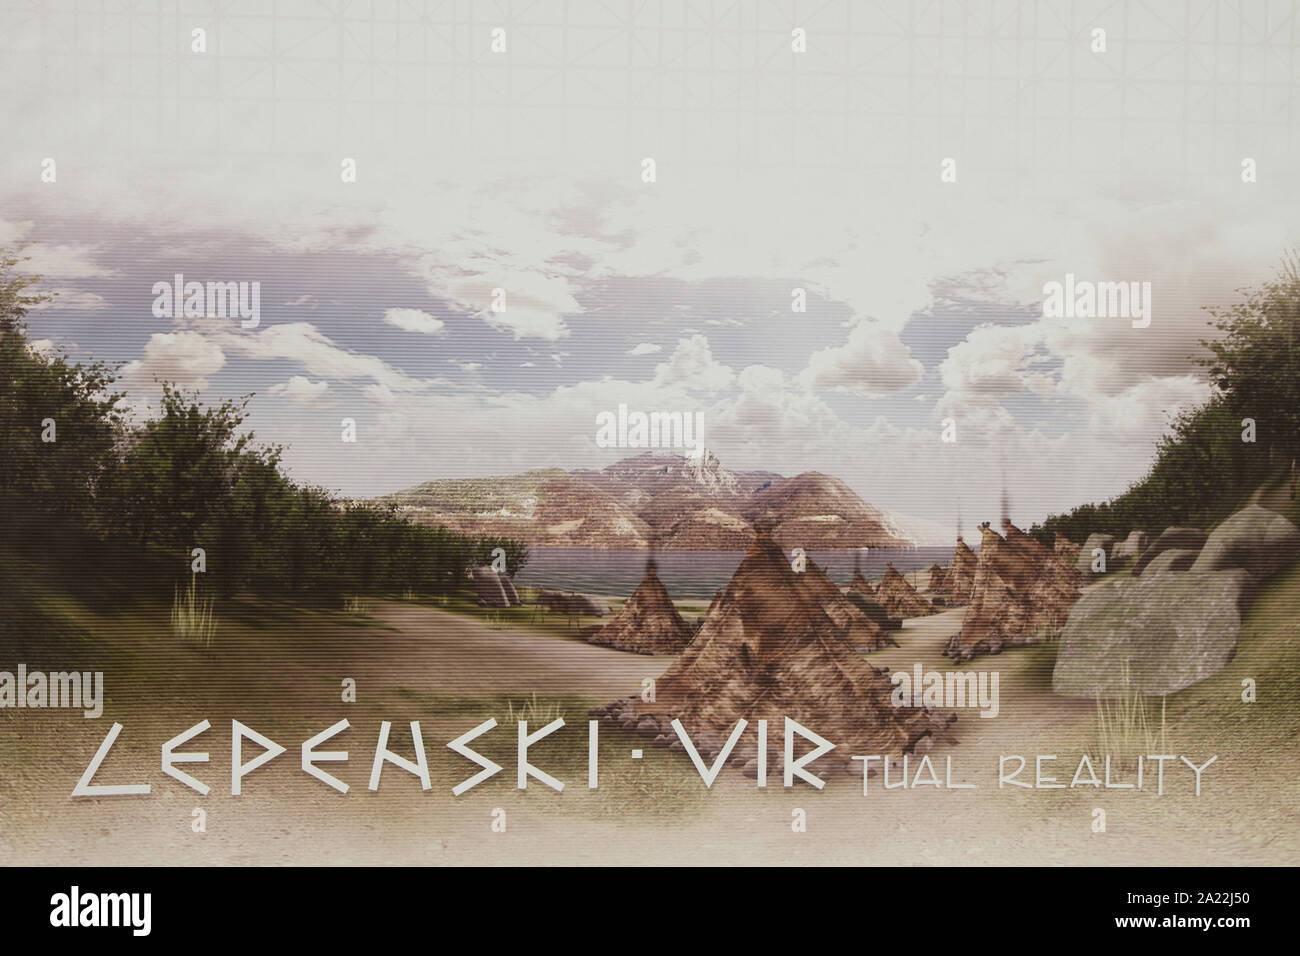 LEPENSKI VIRtual REALITY poster for a presentation at Lepenski Vir AKA Lepena Whirlpool, archaeological site of the Mesolithic Iron Gates culture of the Balkans, Boljetin, Serbia. Stock Photo